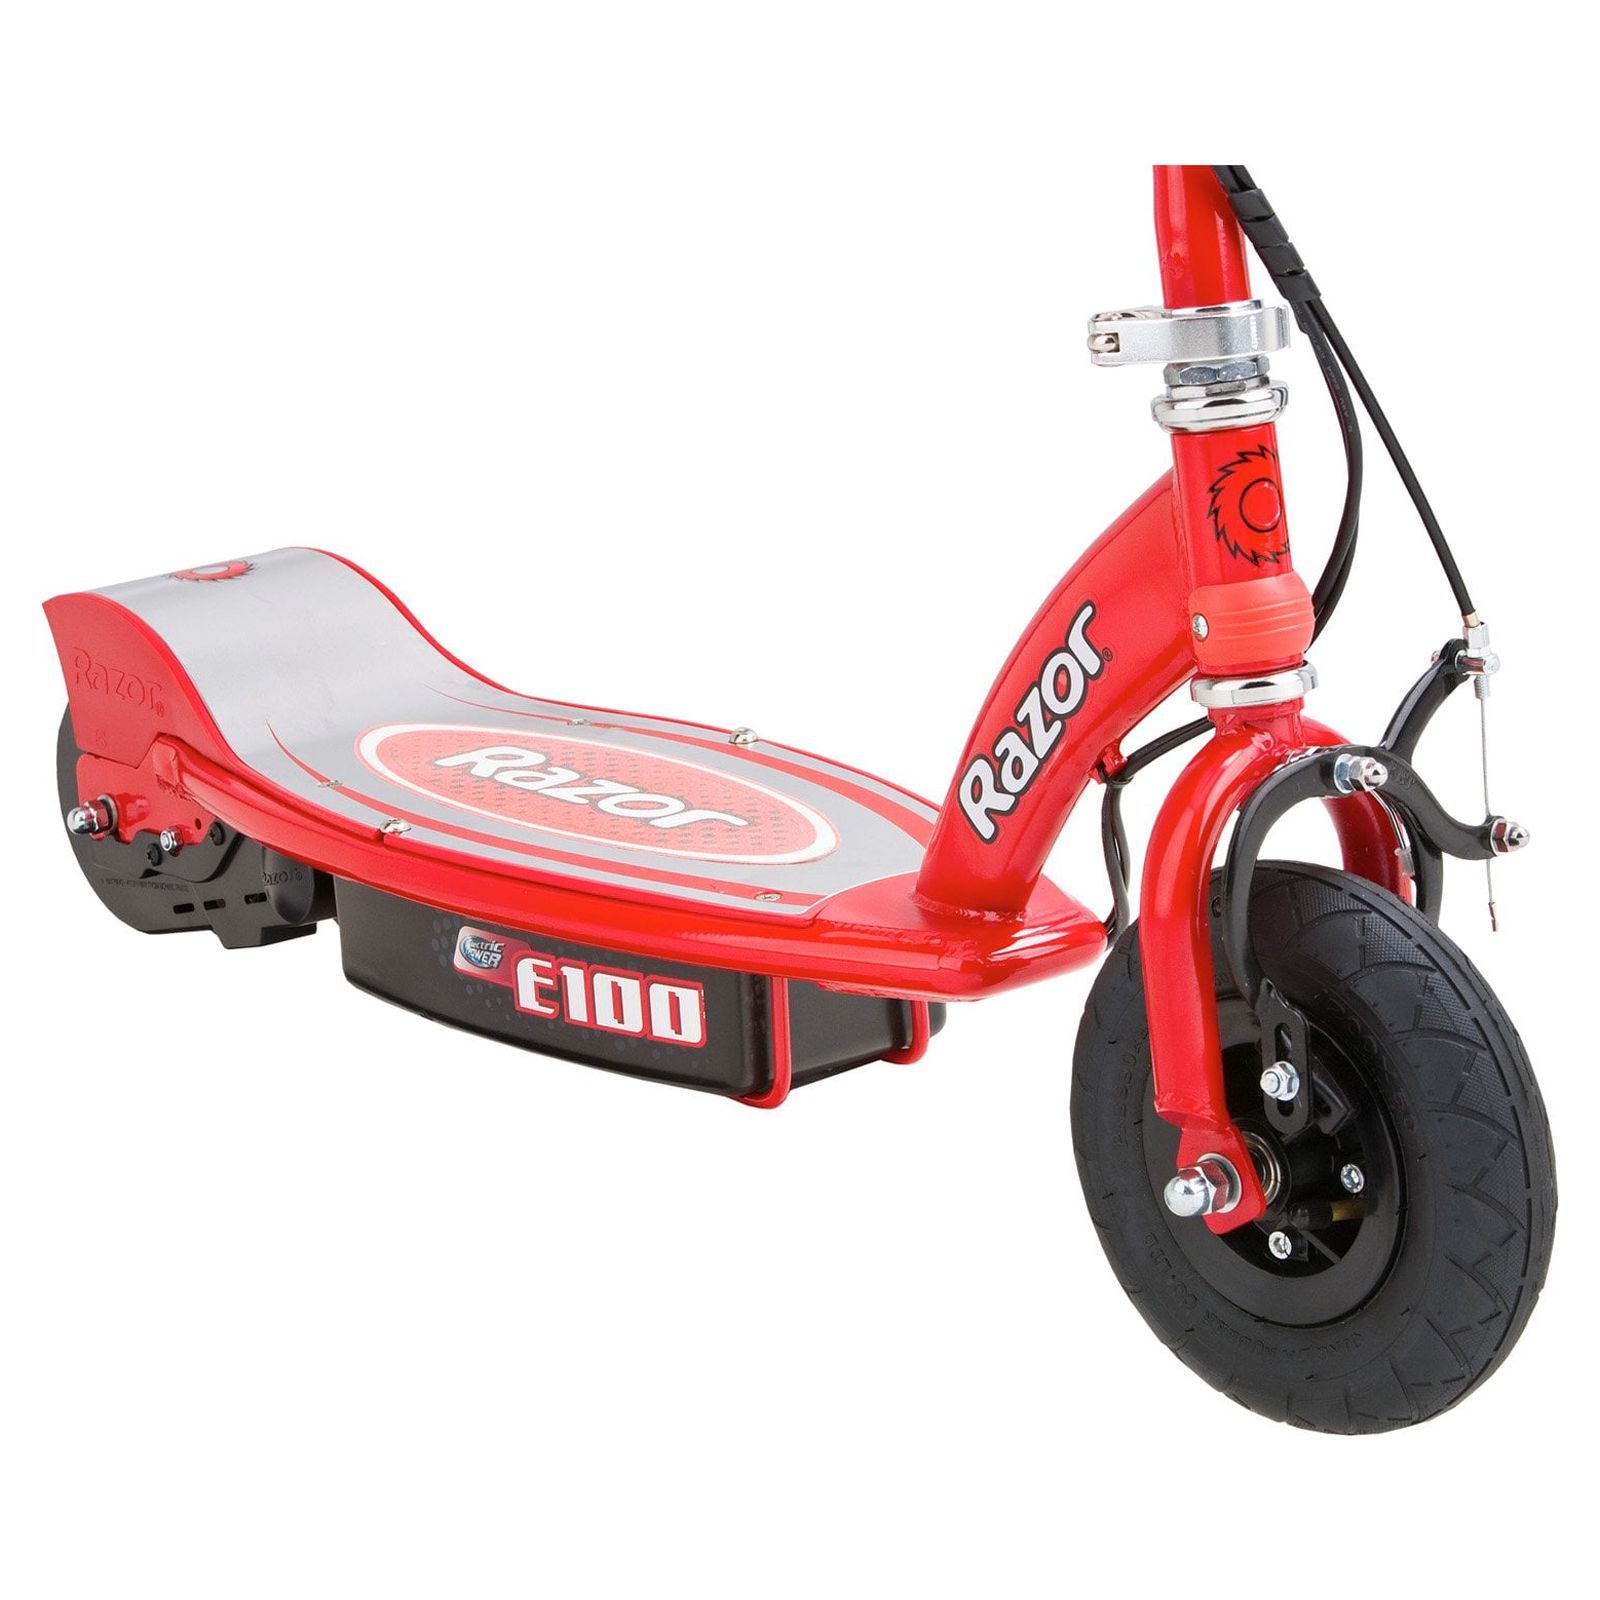 Razor E100 Electric Scooter - Red, for Kids Ages 8+ and up to 120 lbs, 8" Pneumatic Front Tire, 100W Chain Motor, Up to 10 mph & Up to 40 mins of Ride Time, 24V Sealed Lead-Acid Battery - image 5 of 8